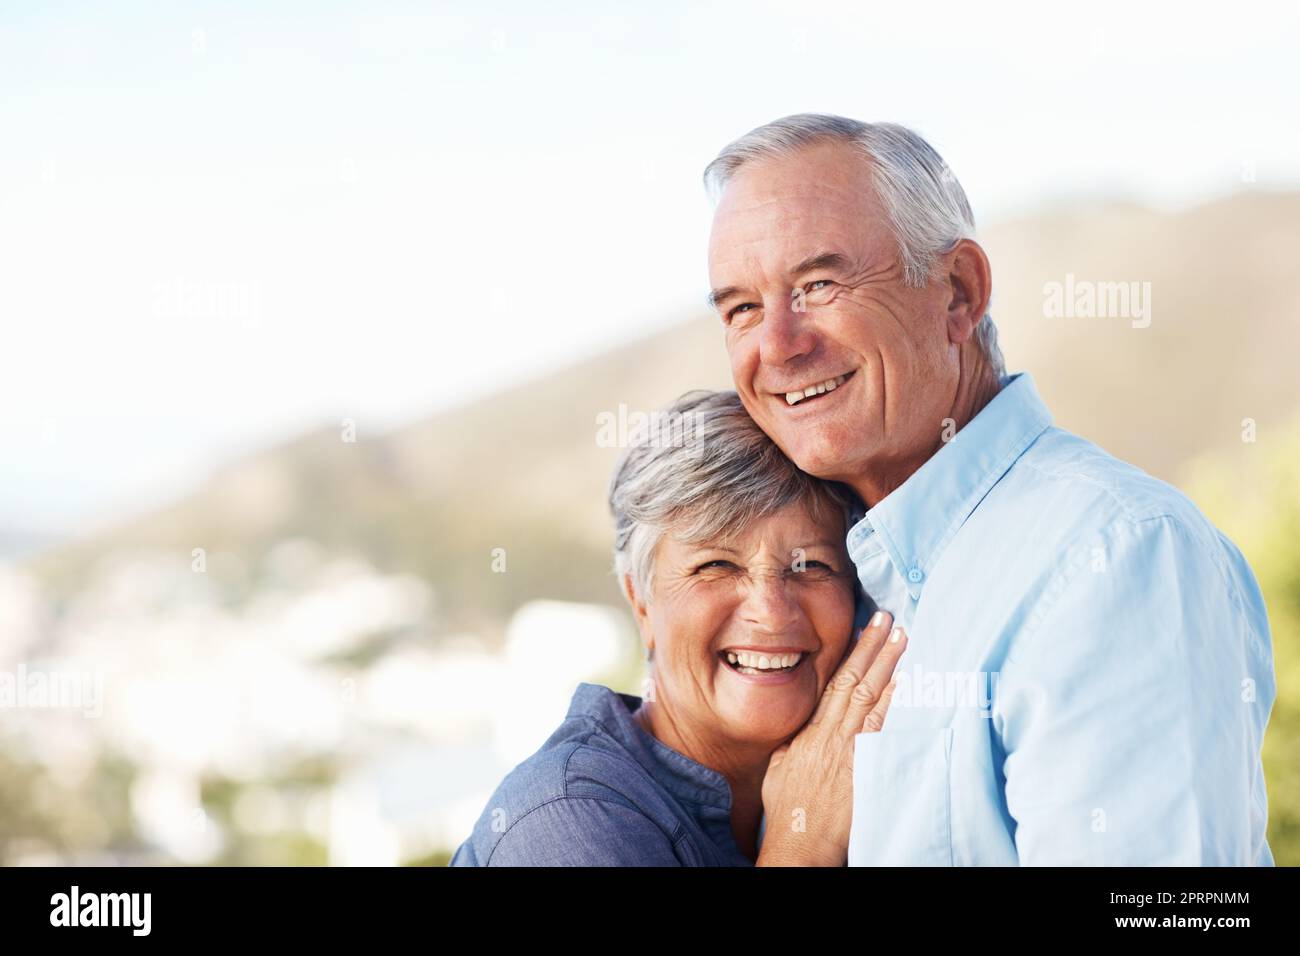 Cute mature couple smiling. Portrait of smiling mature woman leaning on mans chest with mountain in background. Stock Photo